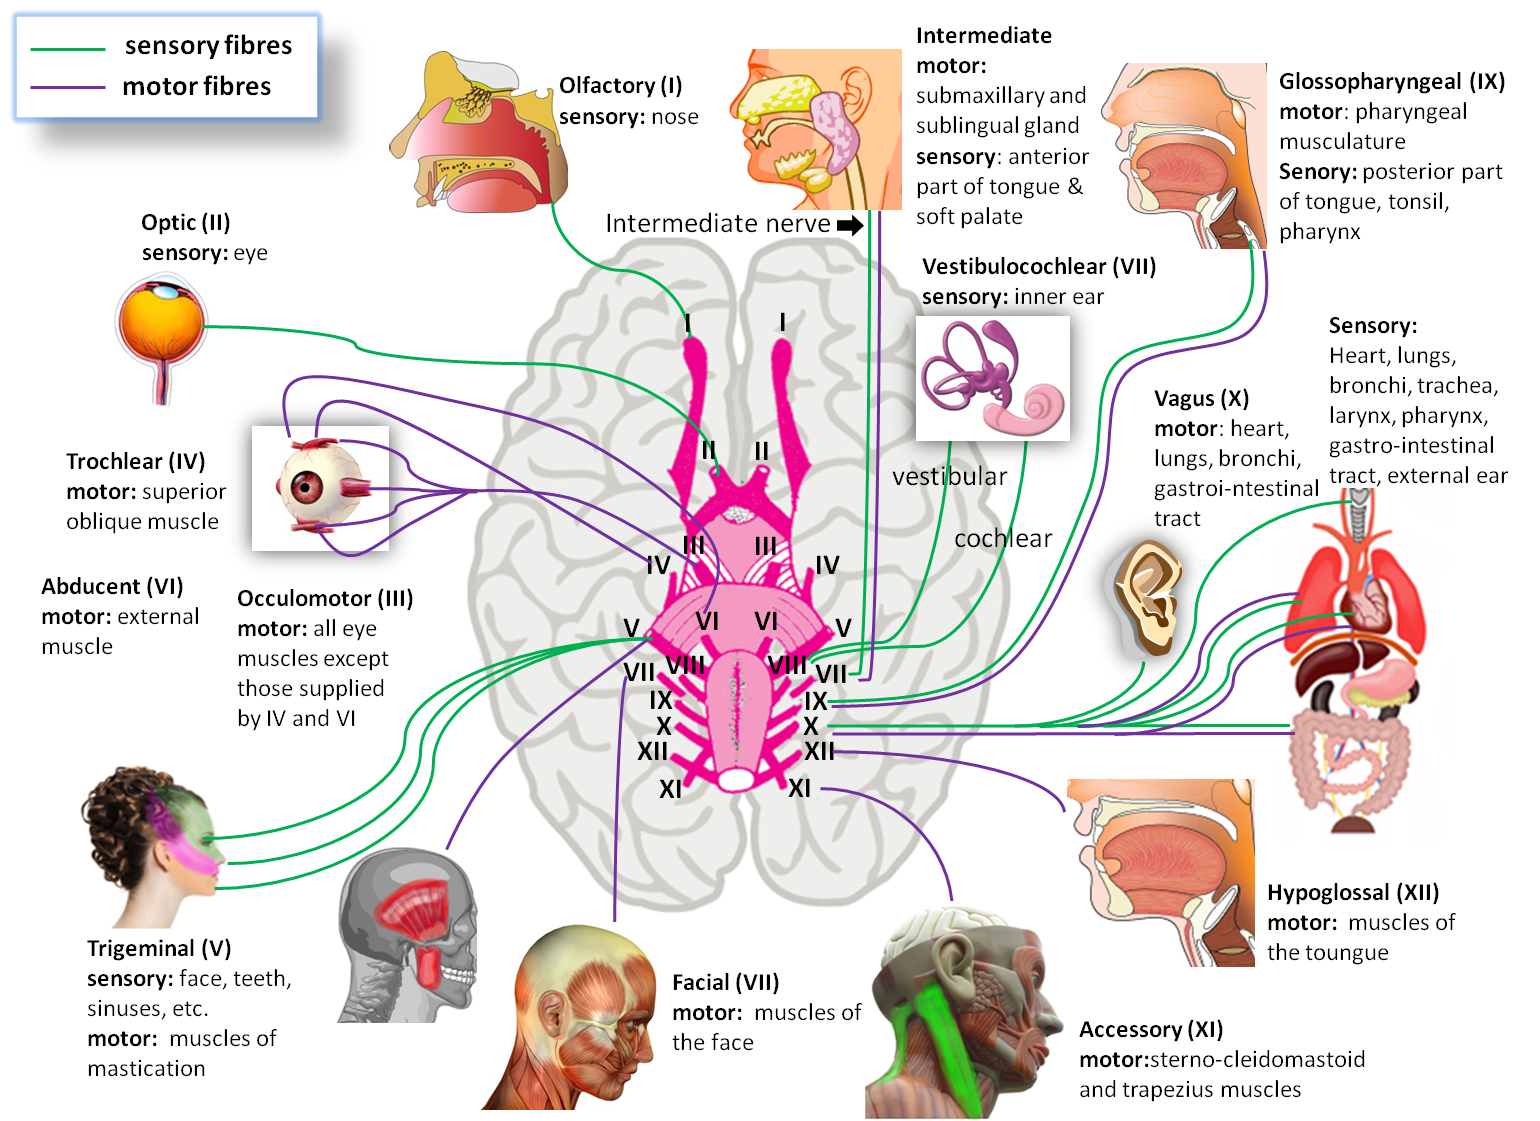 Biology Diagrams Images Pictures Of Human Anatomy And